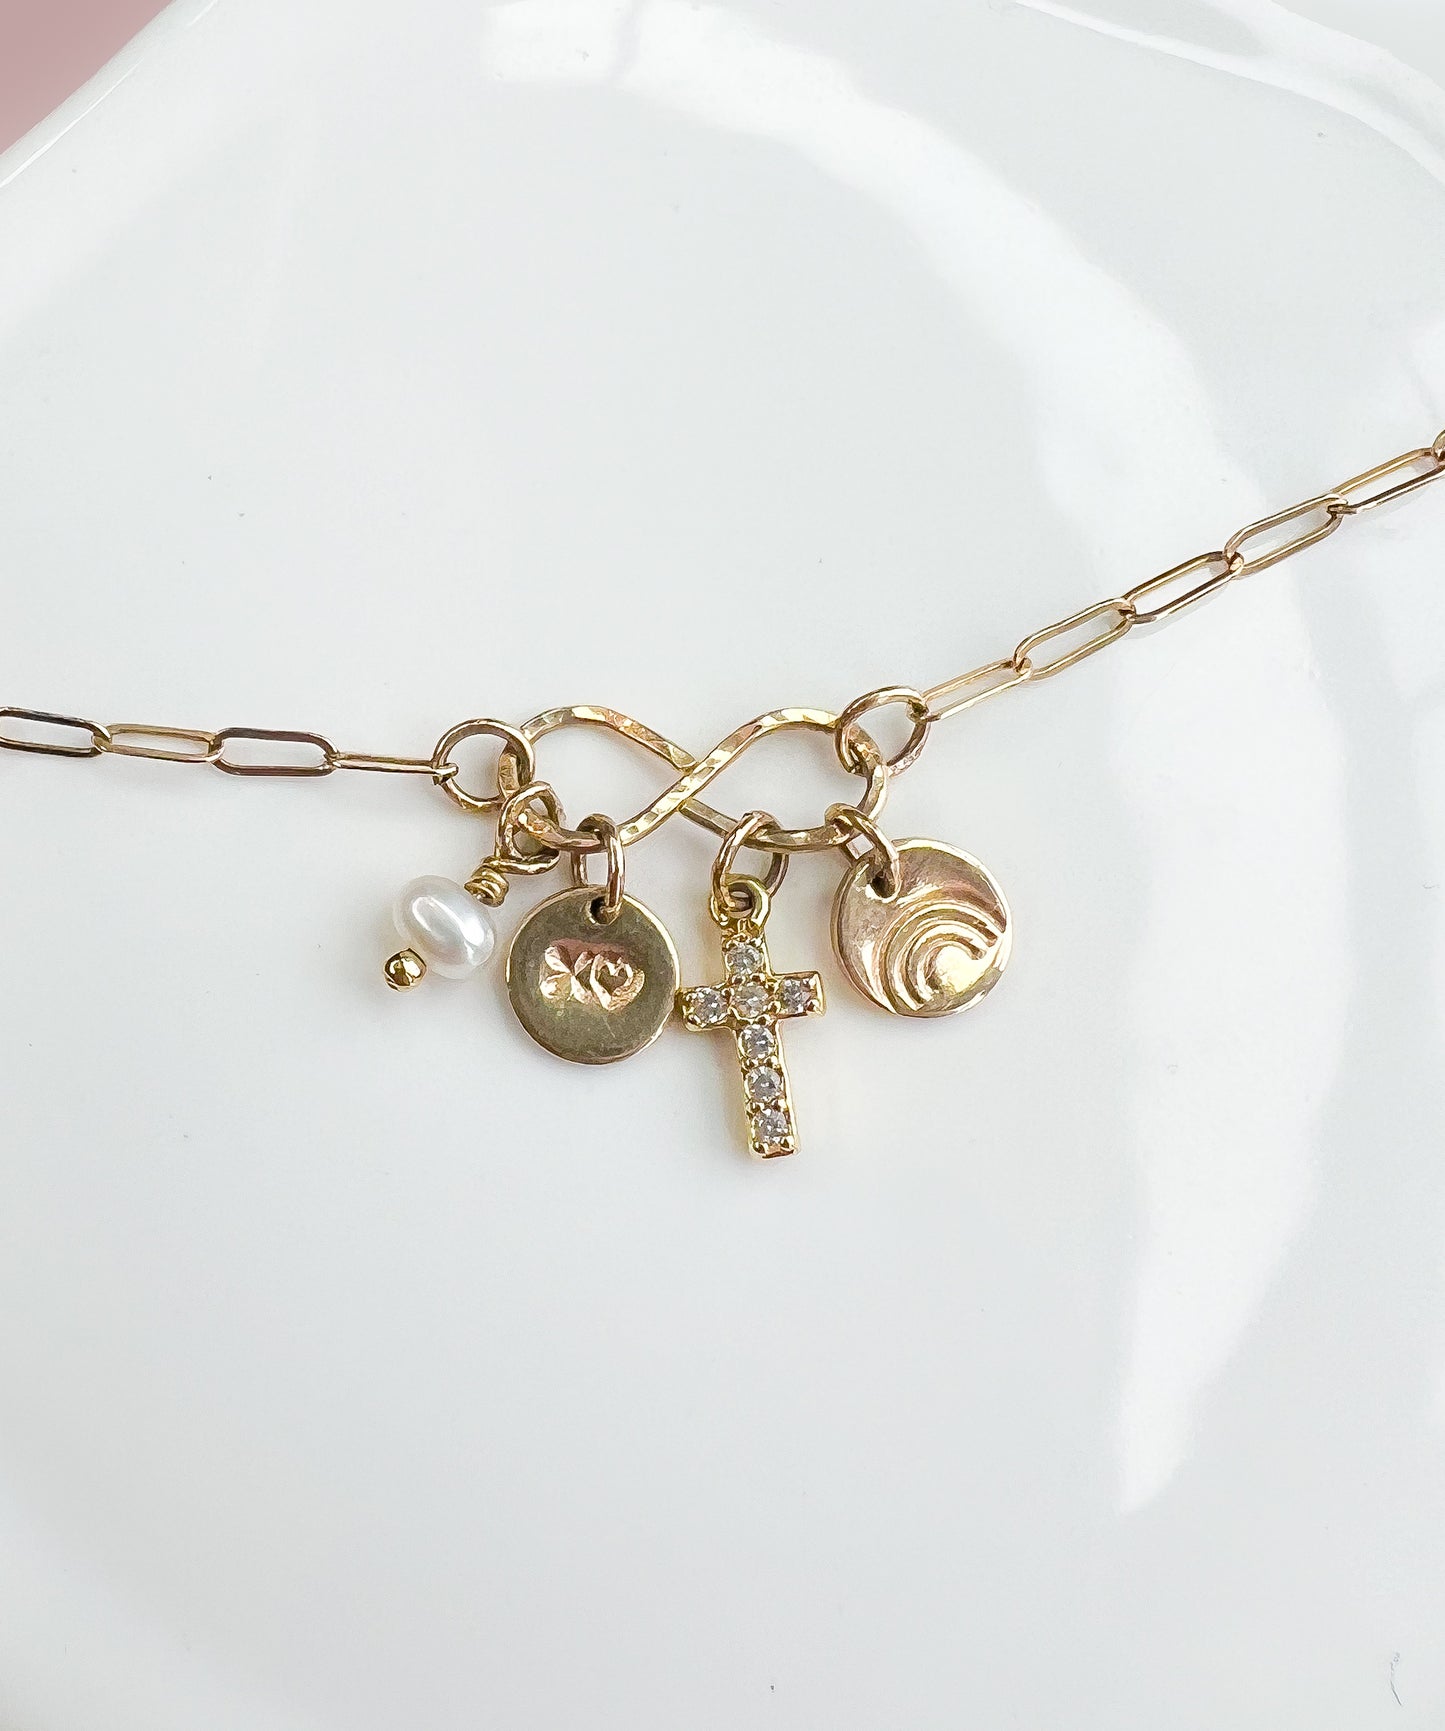 Gold Charm Necklace with 4 charms- Initial Love Jewelry